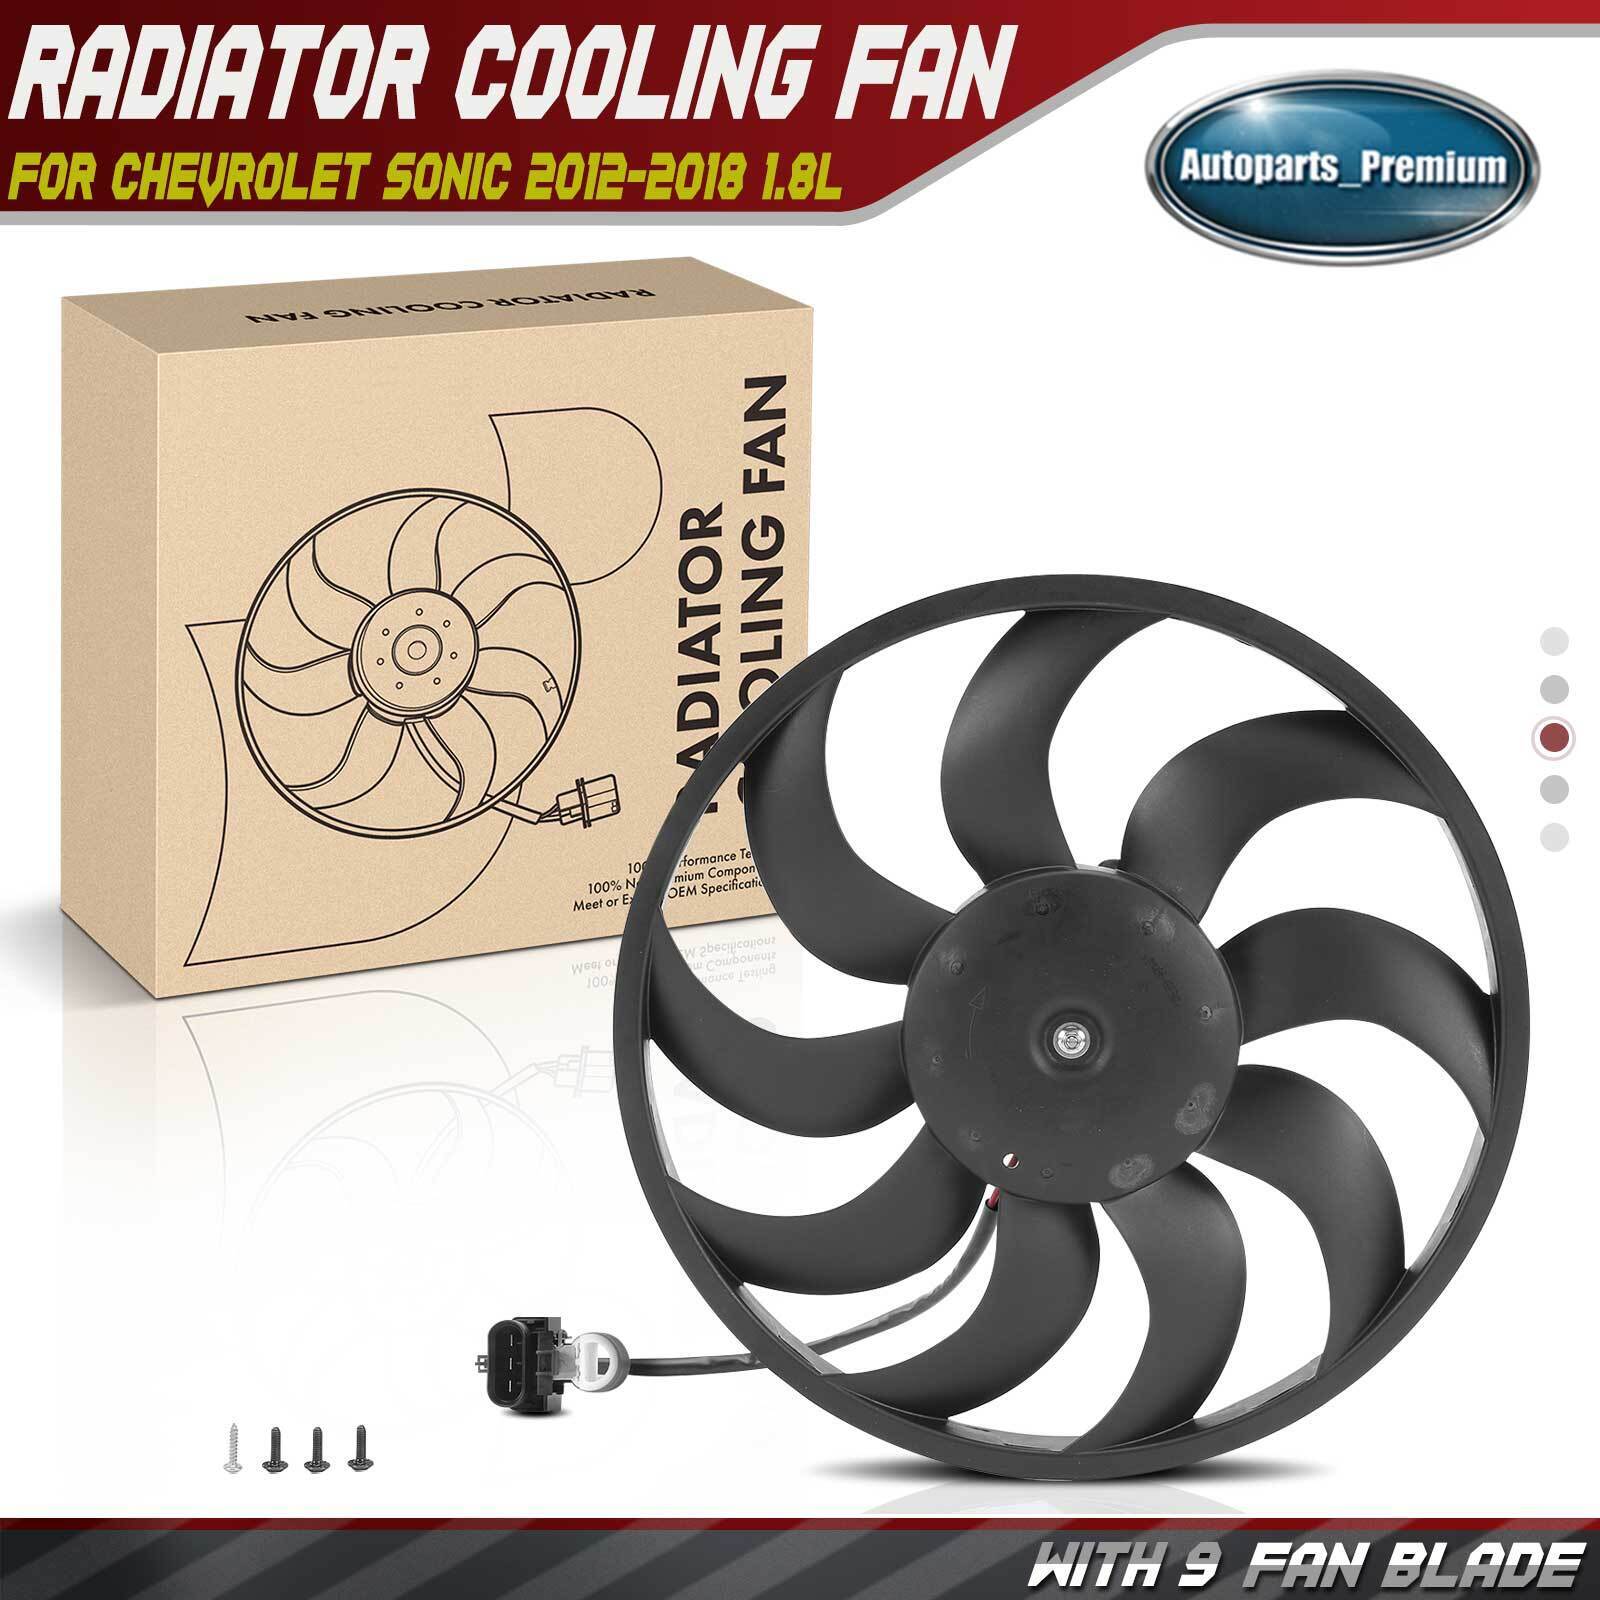 New Radiator Cooling Fan Assembly for Chevrolet Sonic 2012-2018 L4 1.8L Manual